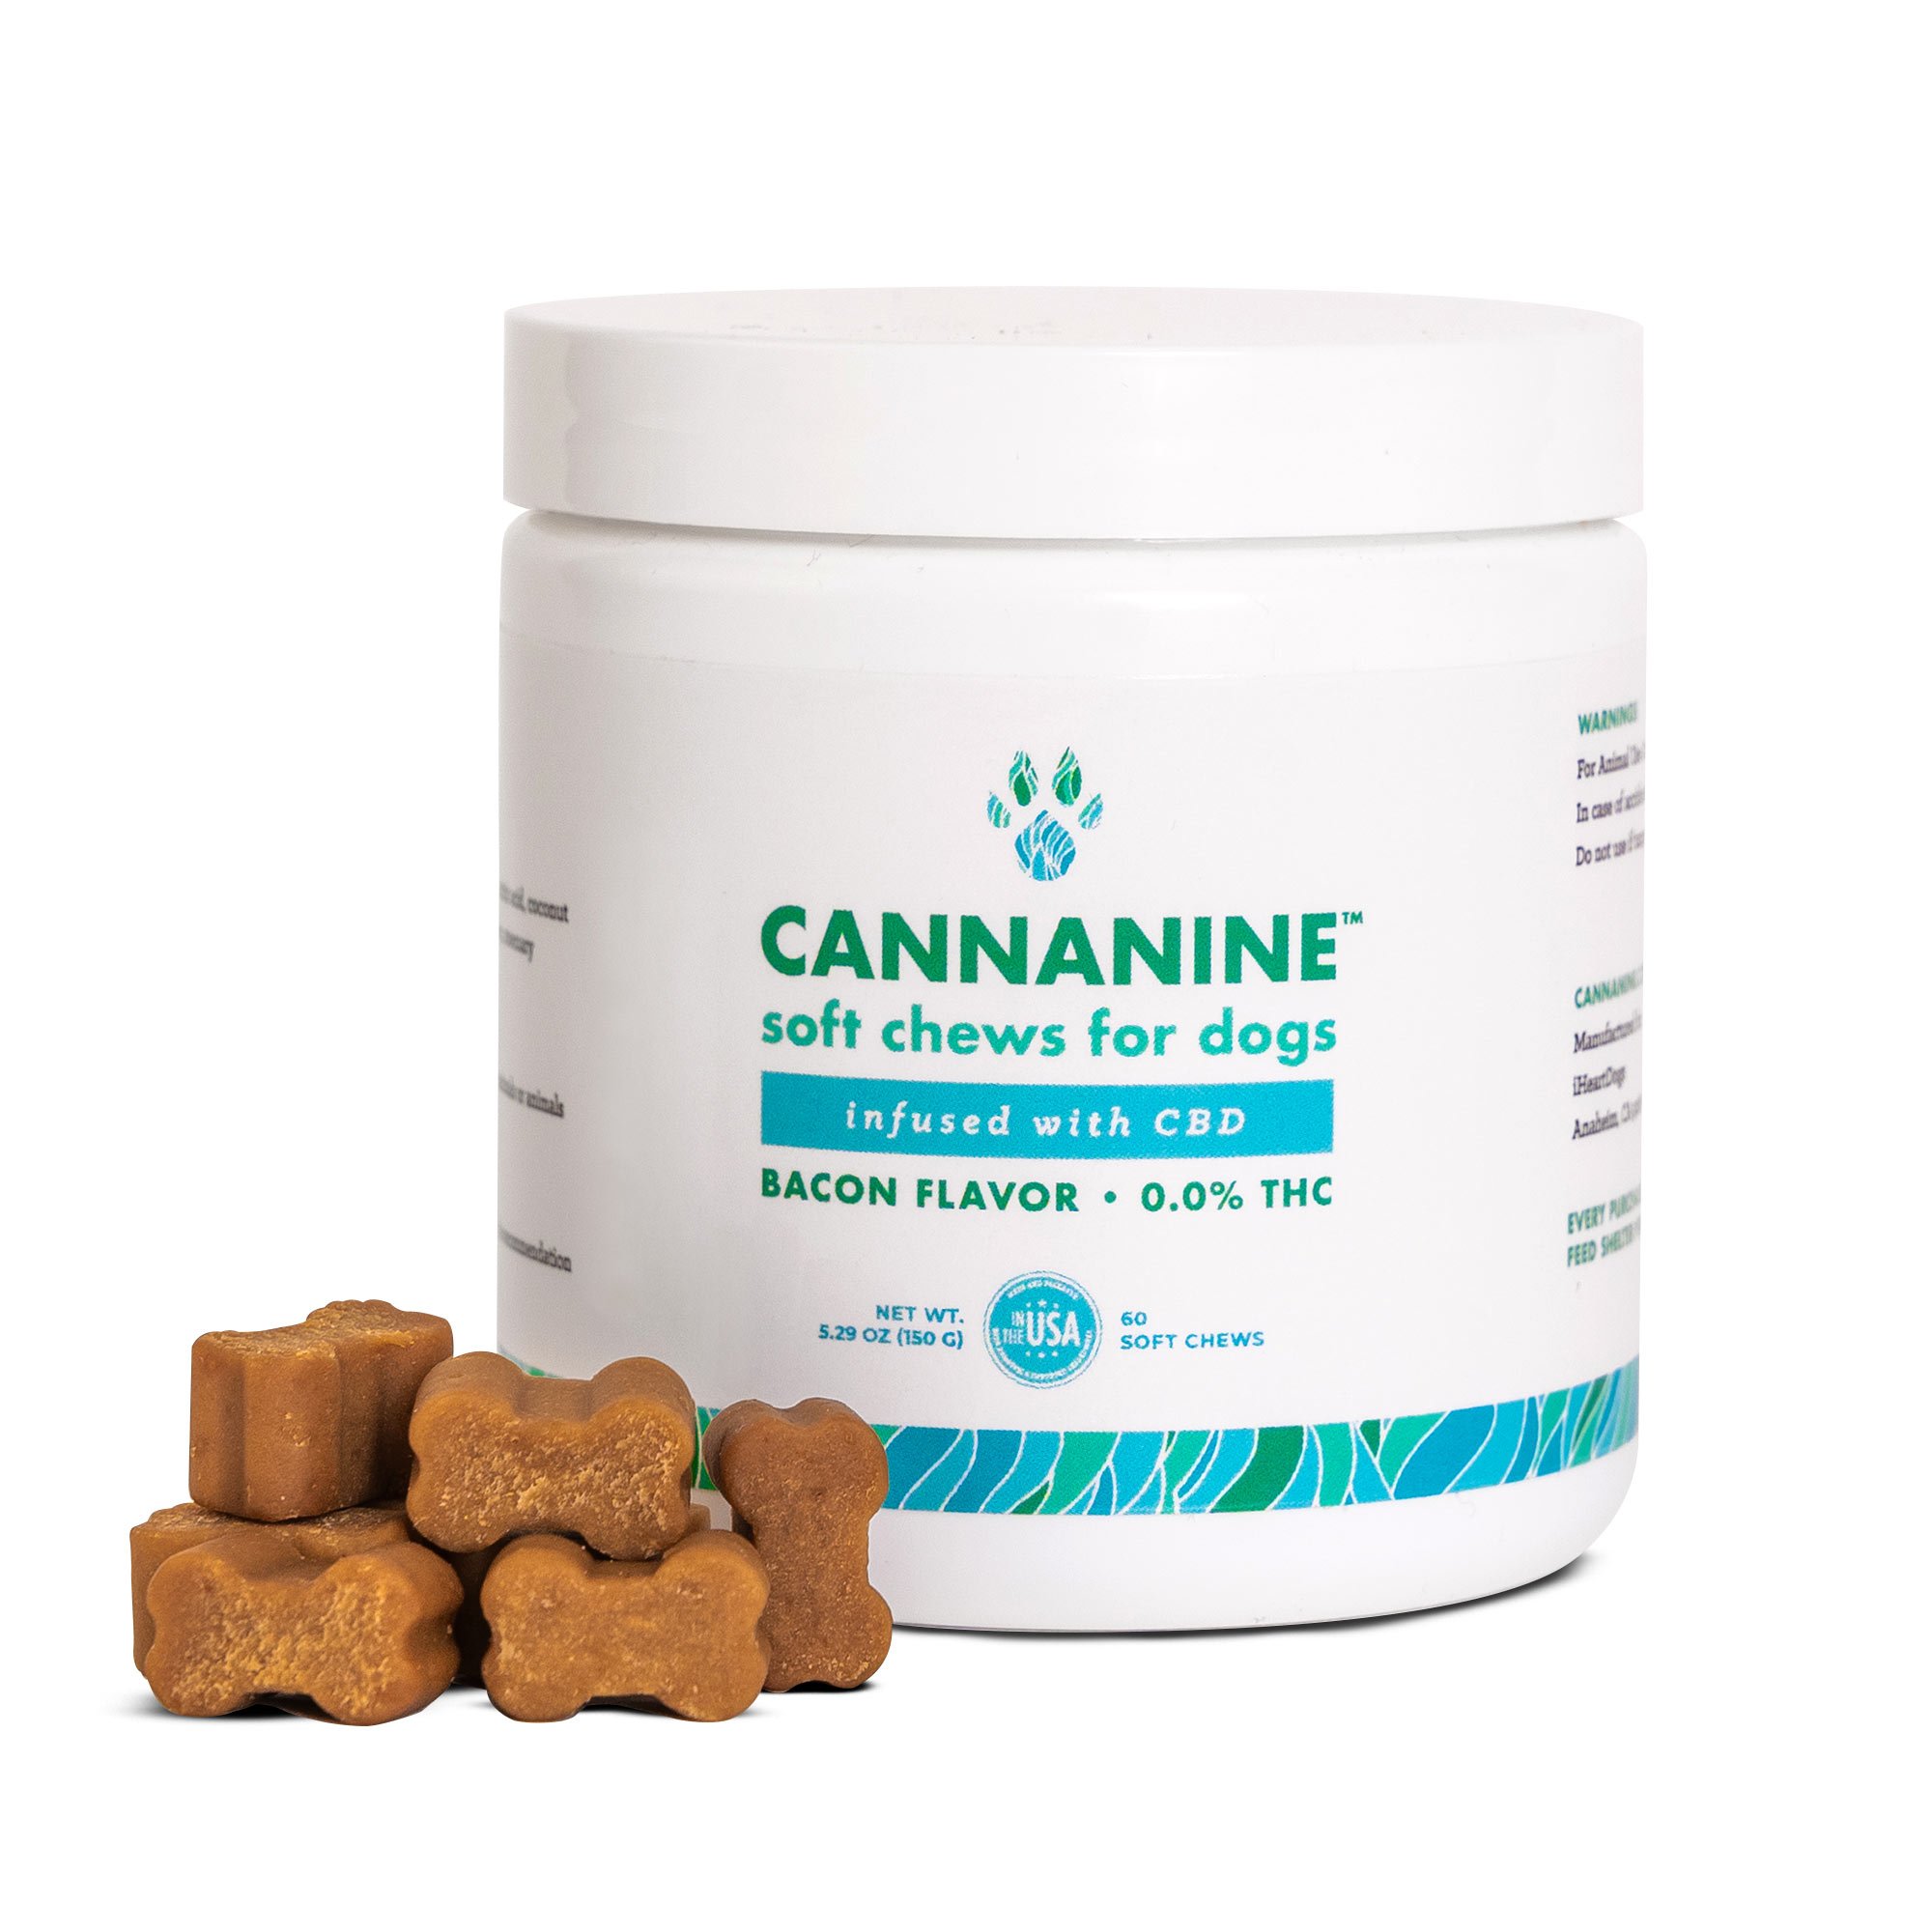 can you give a dog cbd gummies